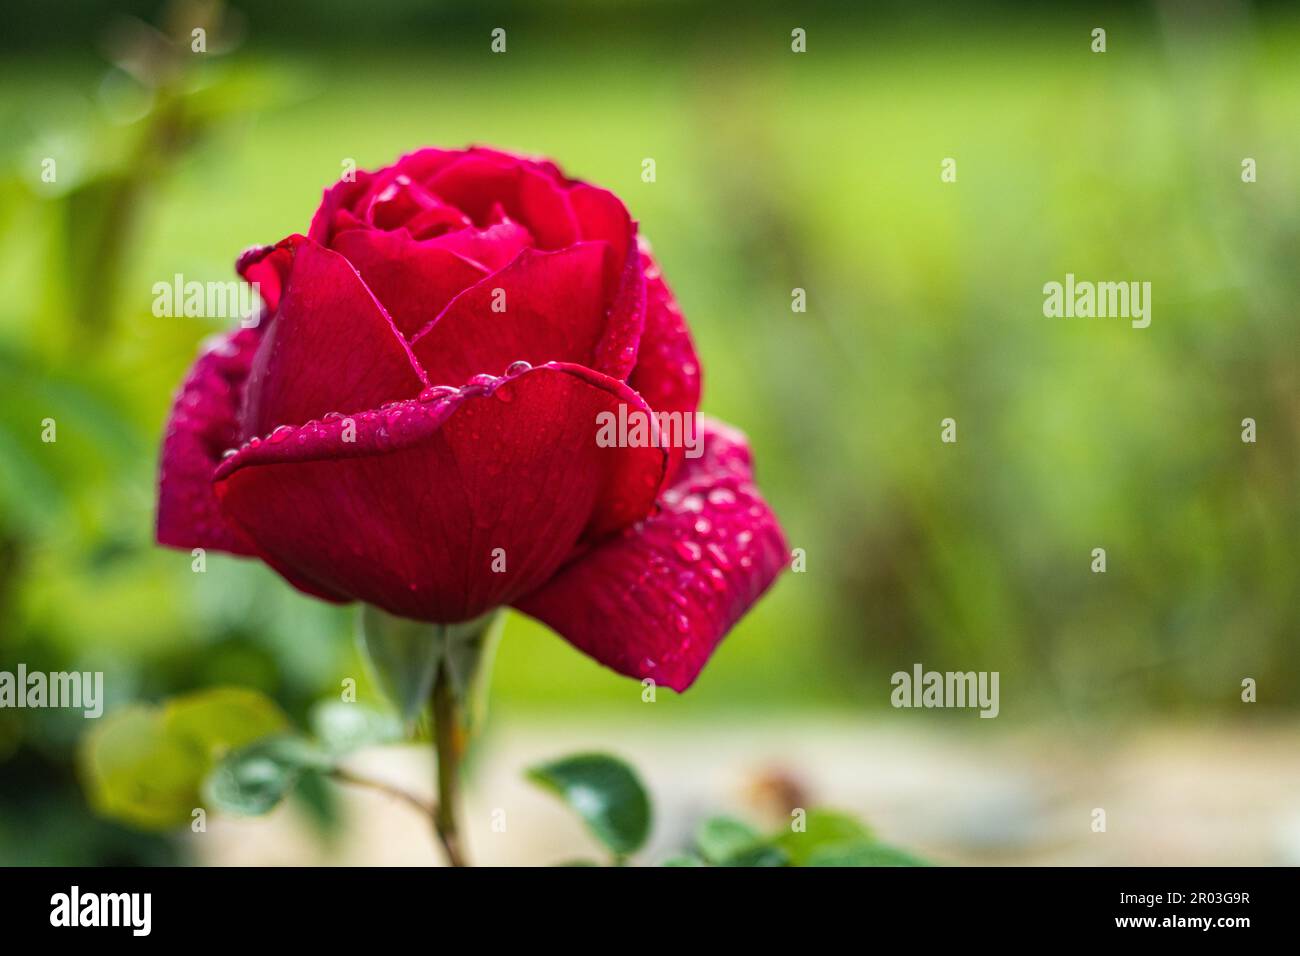 Delicate red rose with gentle wet petals and green leaves growing in garden with lush vegetation Stock Photo